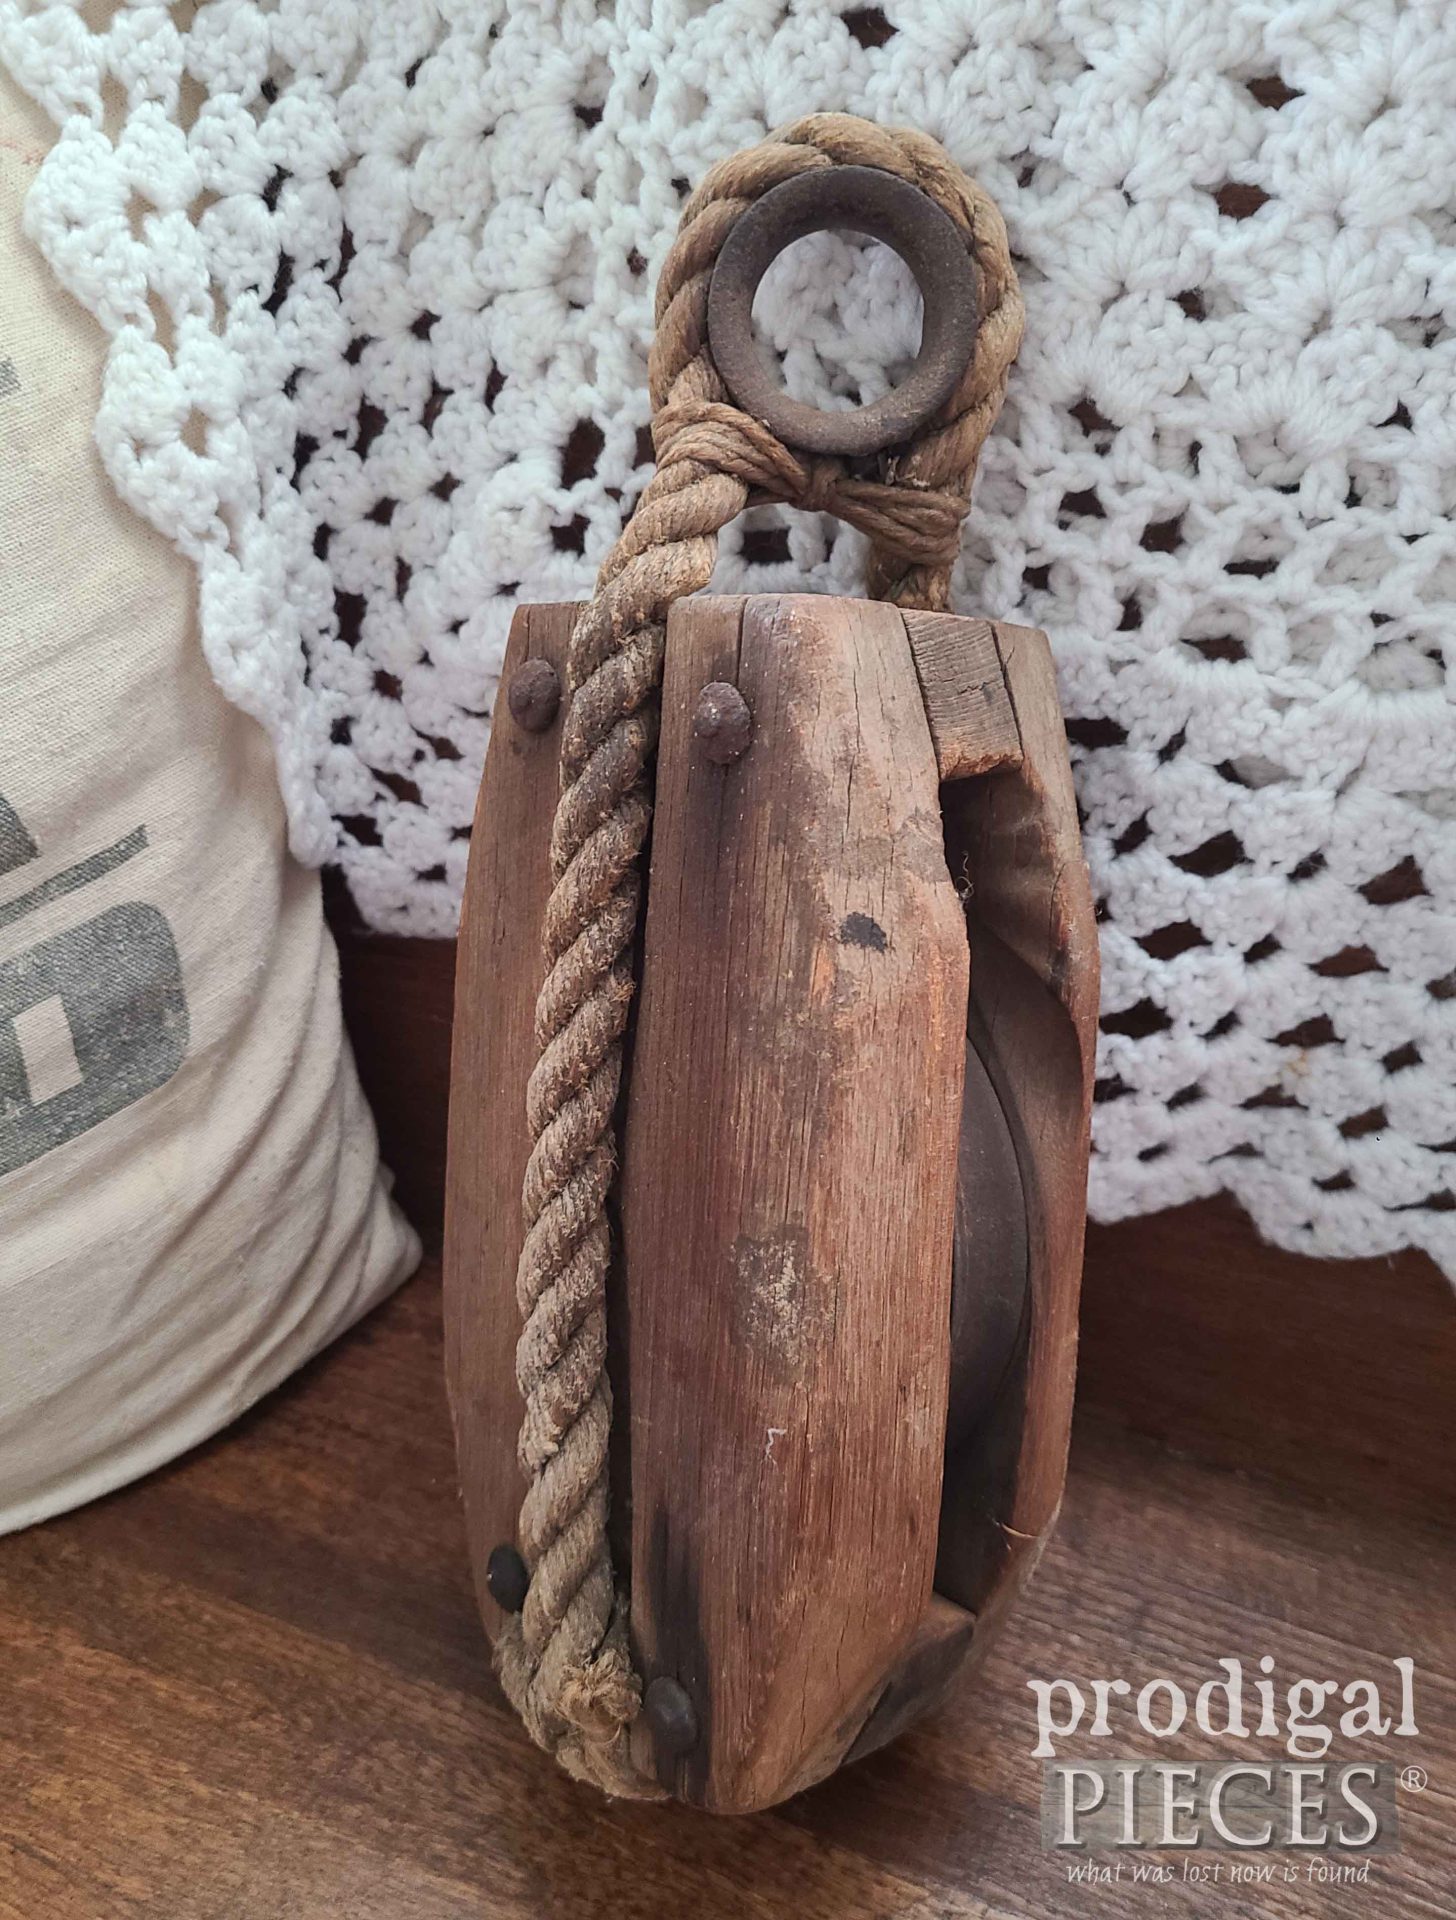 Antique Wooden Pulley for Farmhouse Decor and Thrifted Basket Makeover | prodigalpieces.com #prodigalpieces